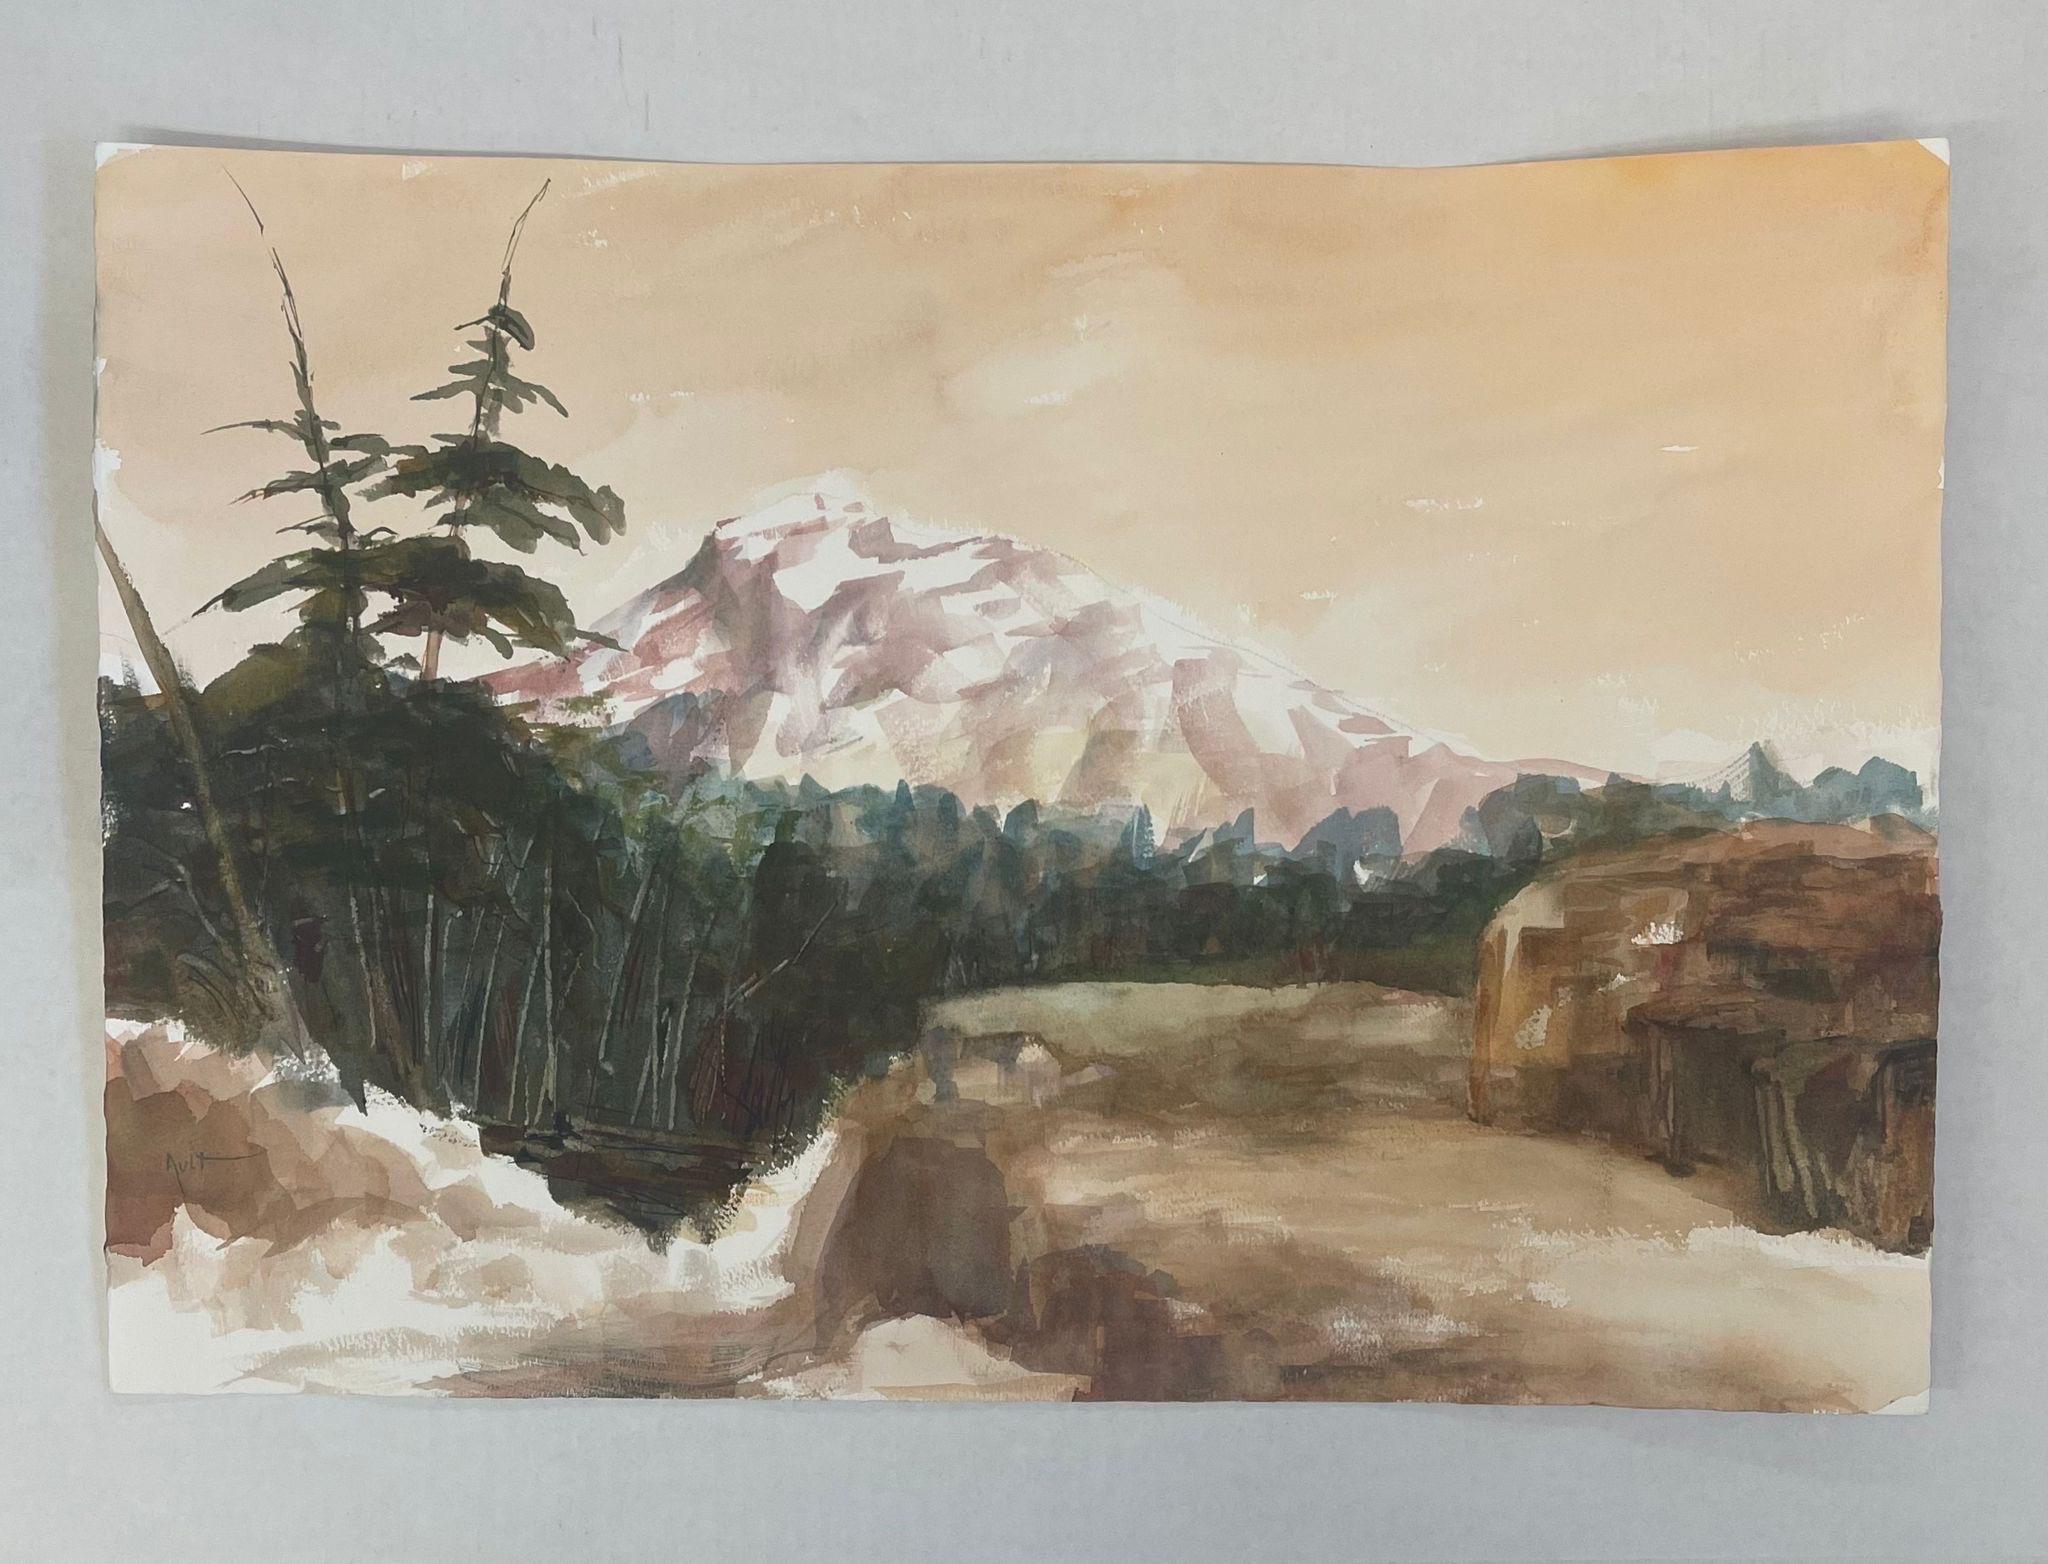 Vintage Artwork of Abstract Landscape Focusing on a Mountain and Trees.Possibly Watercolor on Paper. Vintage Condition Consistent with Age as Pictured.

Dimensions. 20 1/2 W ; 1/8 D ; 13 1/2 H